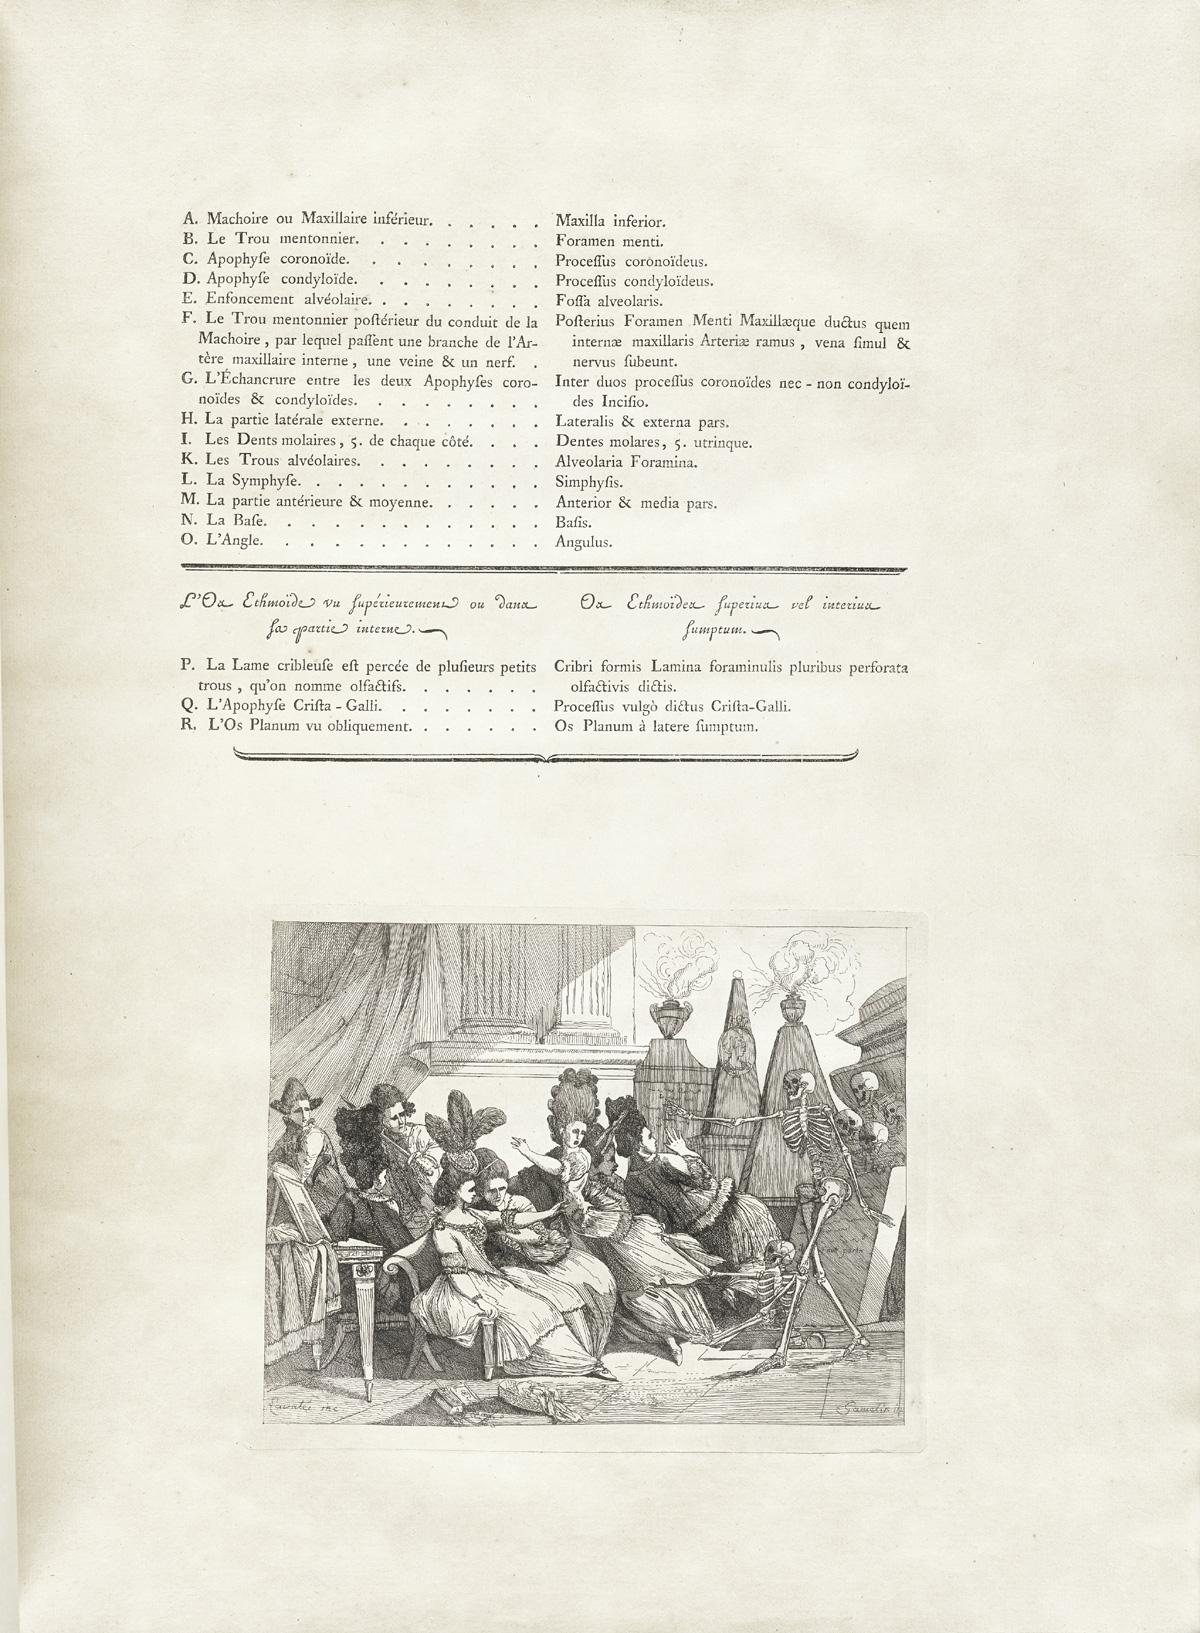 Page of typeset text with an engraving in the bottom half of the page depicting two skeletons on the right hand side of the page attacking a group of well-dressed, wealthy crowd of men and women in 18th-century French dress who are attempting to escape to the left side of the image; around them are tables and chairs found in a salon or conservatory; from Jacques Gamelin’s Nouveau recueil d’osteologie et de myologie, NLM Call no.: WZ 260 G178m 1779.